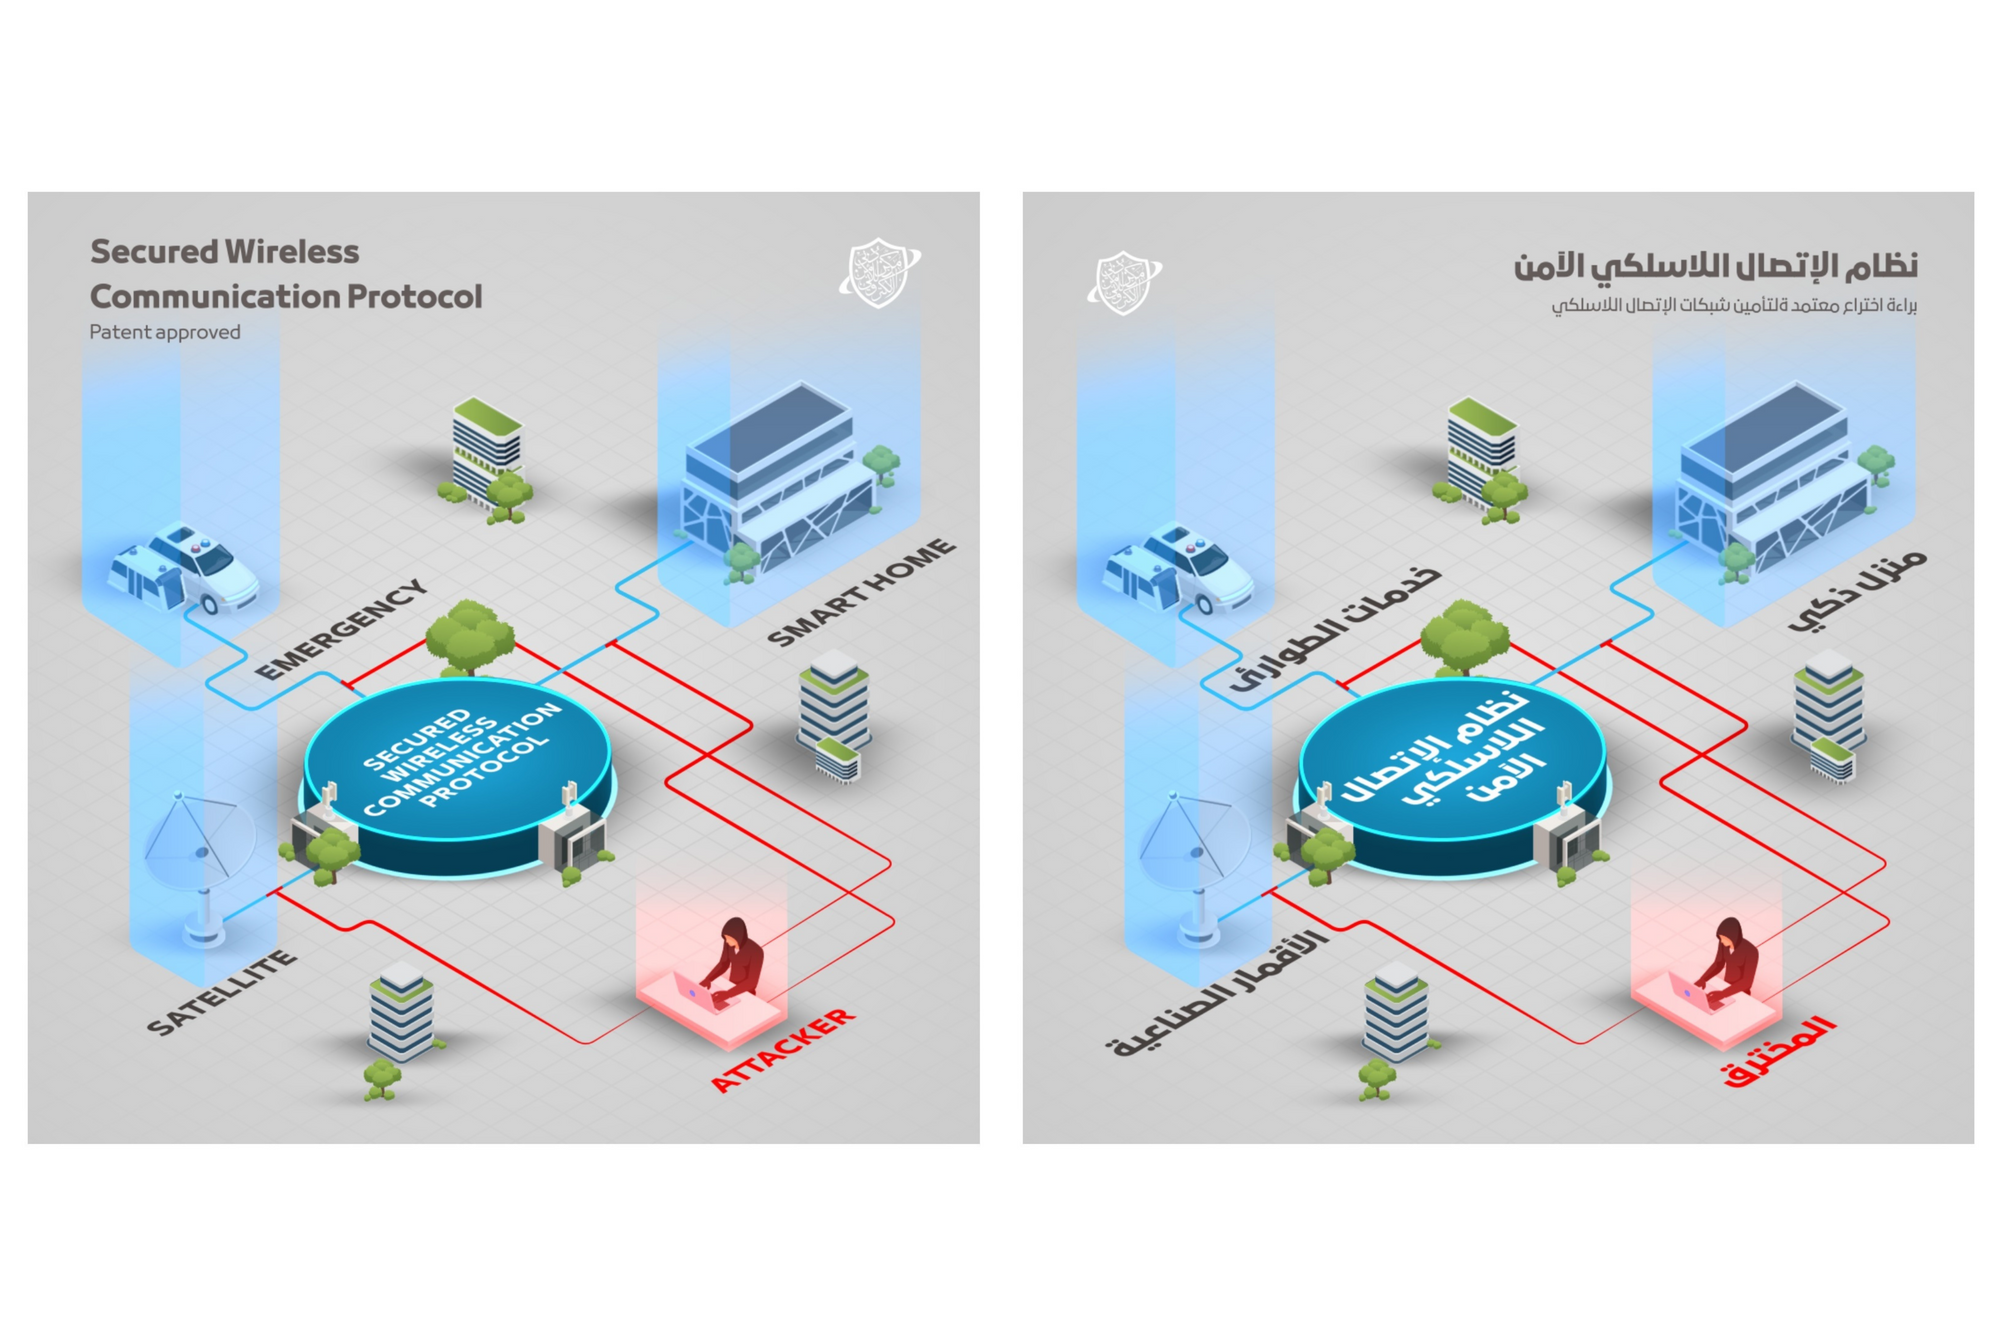 Dubai Electronic Security Center's patent for secure wireless communication with University of Dubai has been approved